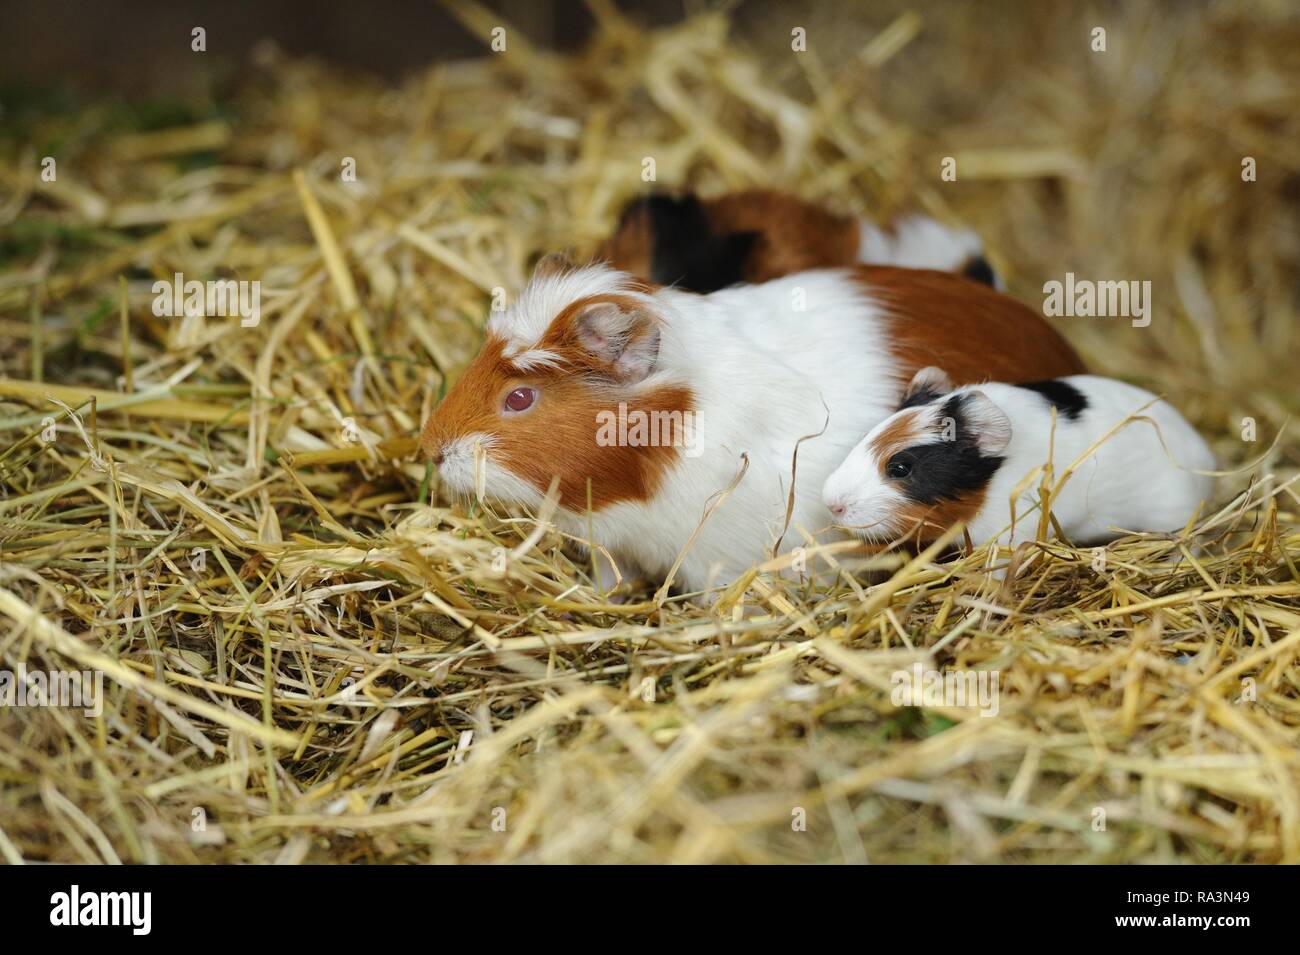 Domestic guinea pig (Cavia porcellus), mother animal with young animals sitting on straw, captive, Germany Stock Photo